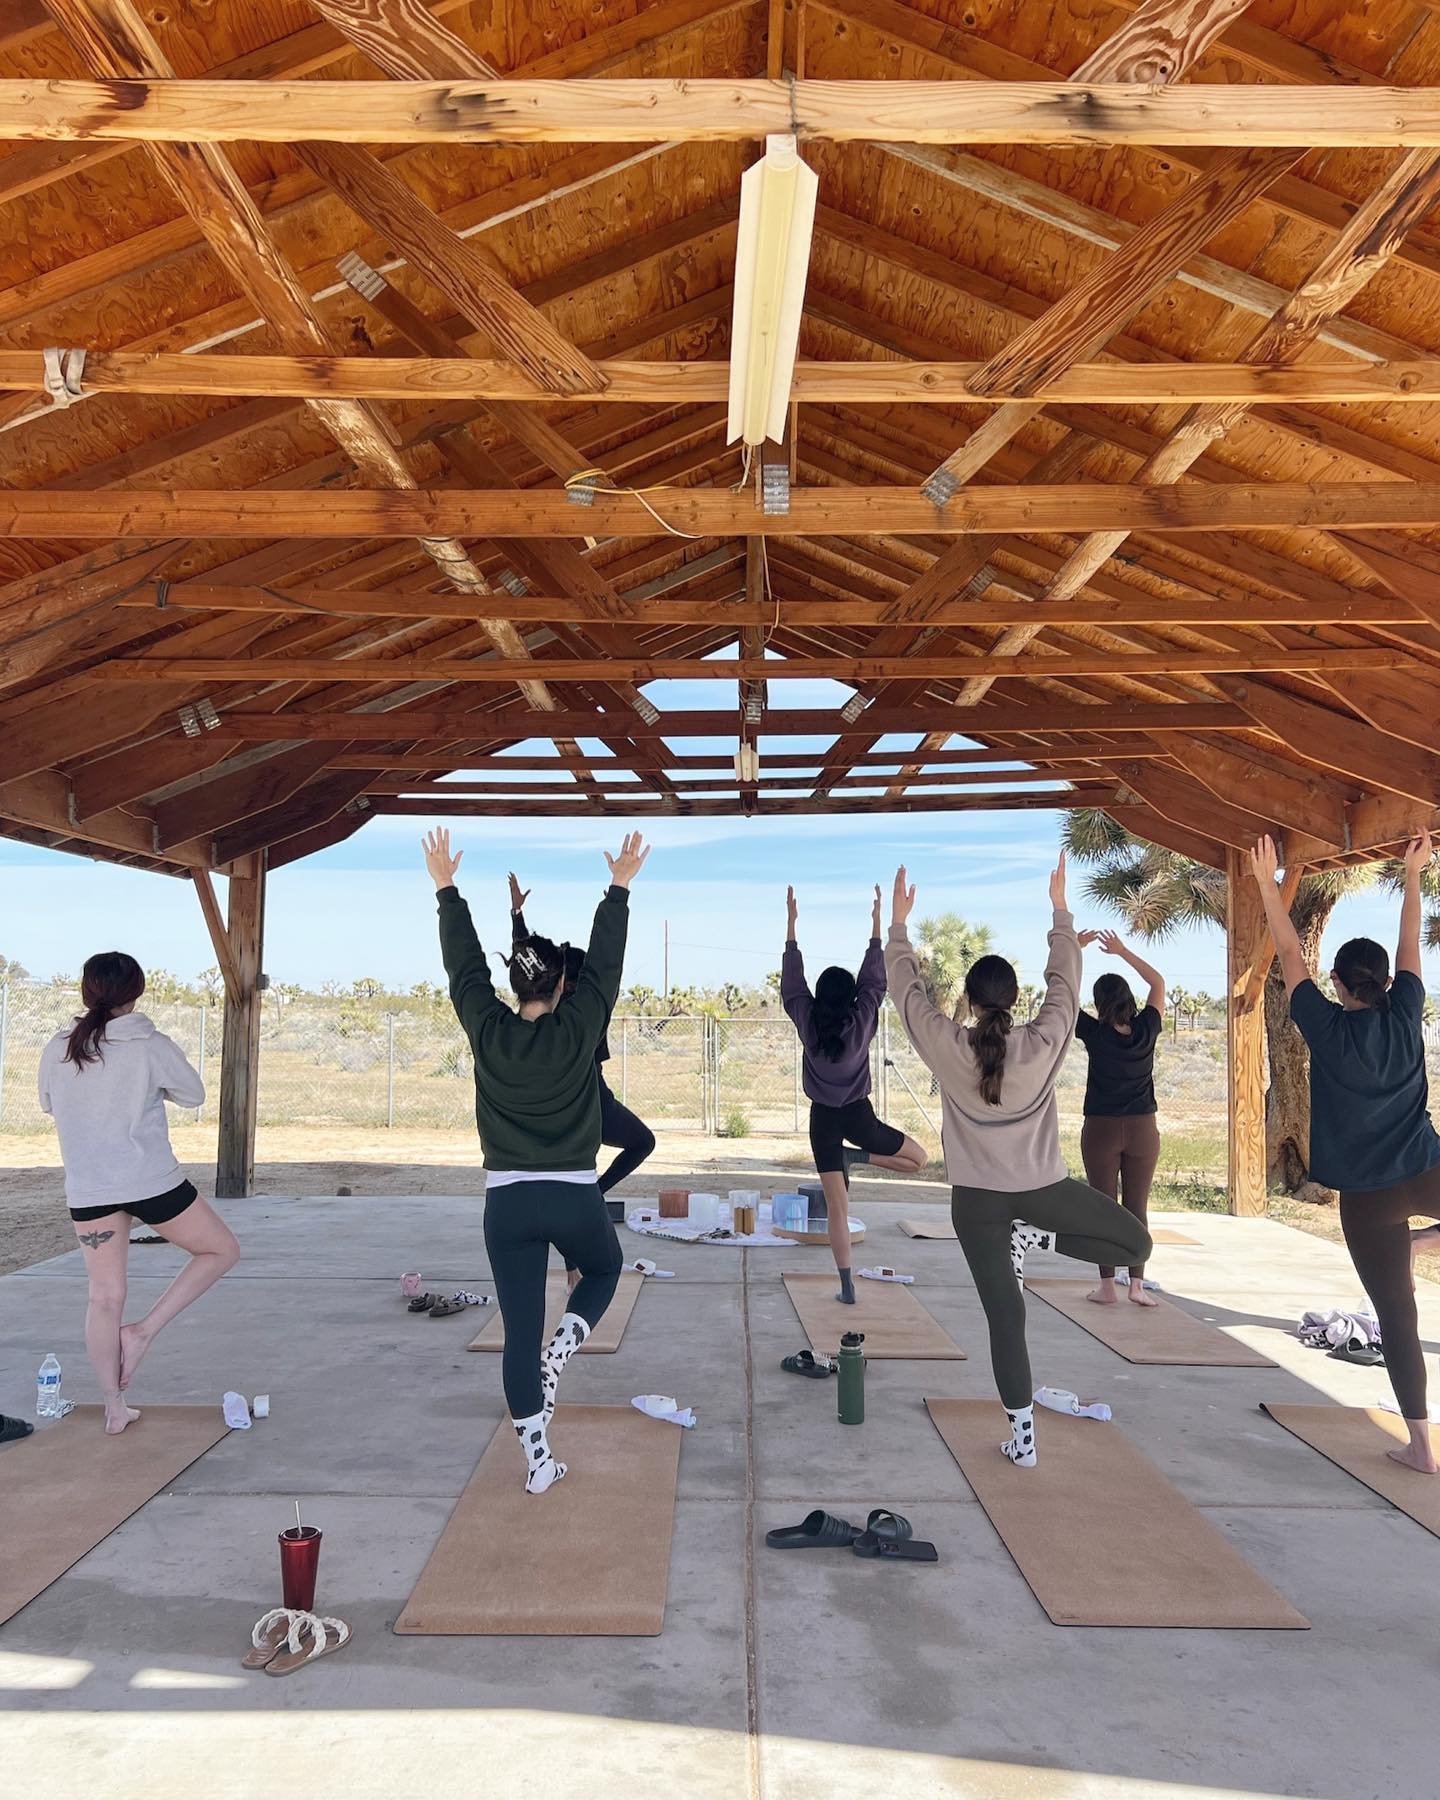 Private yoga + sound for any event ✨

It is high season in the desert right now which means lots of fun opportunities and guests coming through to celebrate birthdays, bachelorettes, warmer weather and life itself. 

There&rsquo;s been a shift in my 